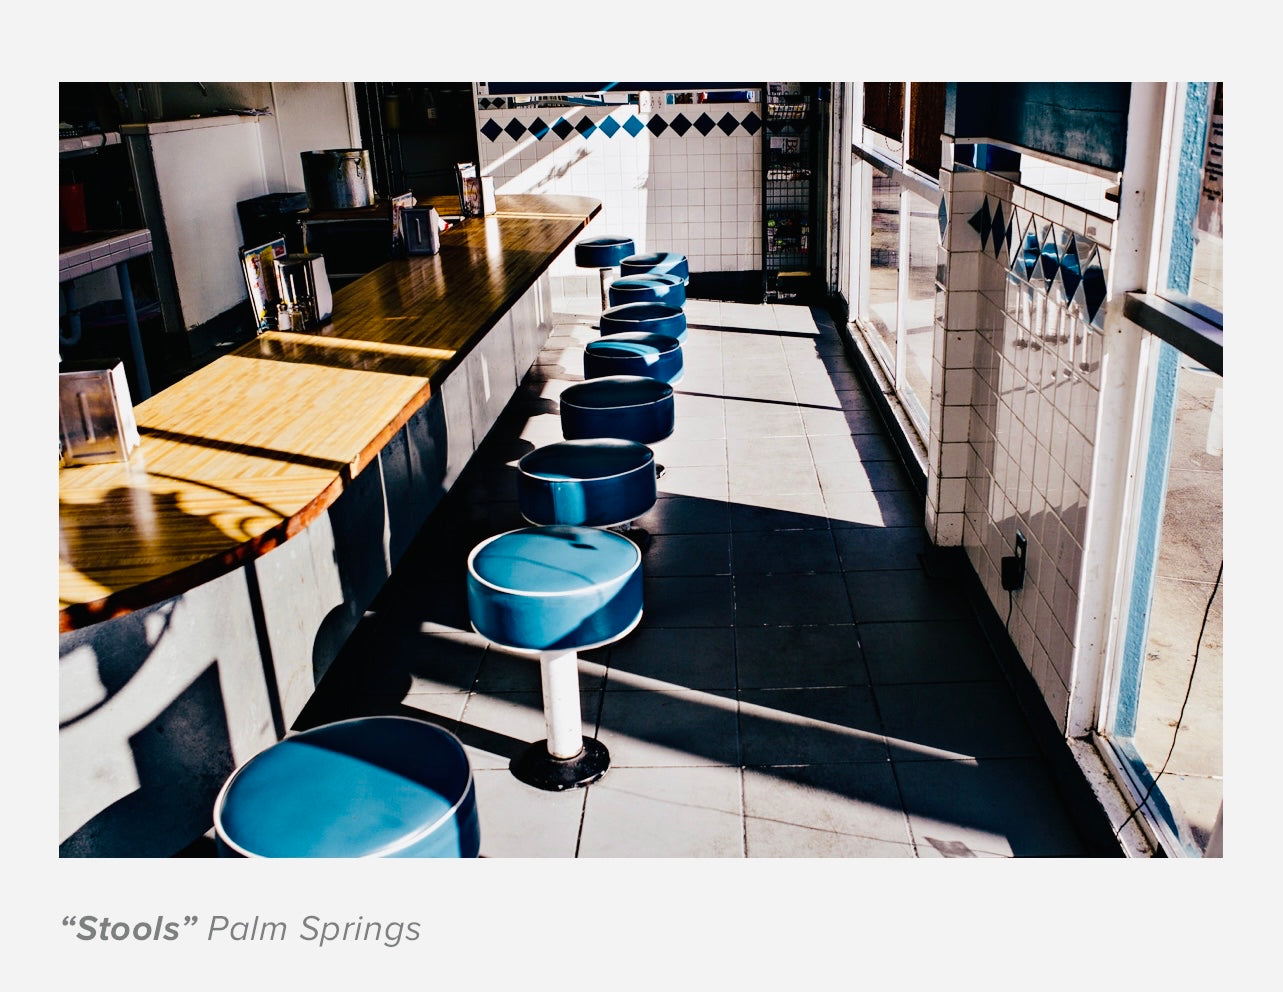 Fine Art Photography by David Register “Stools” Palm Springs